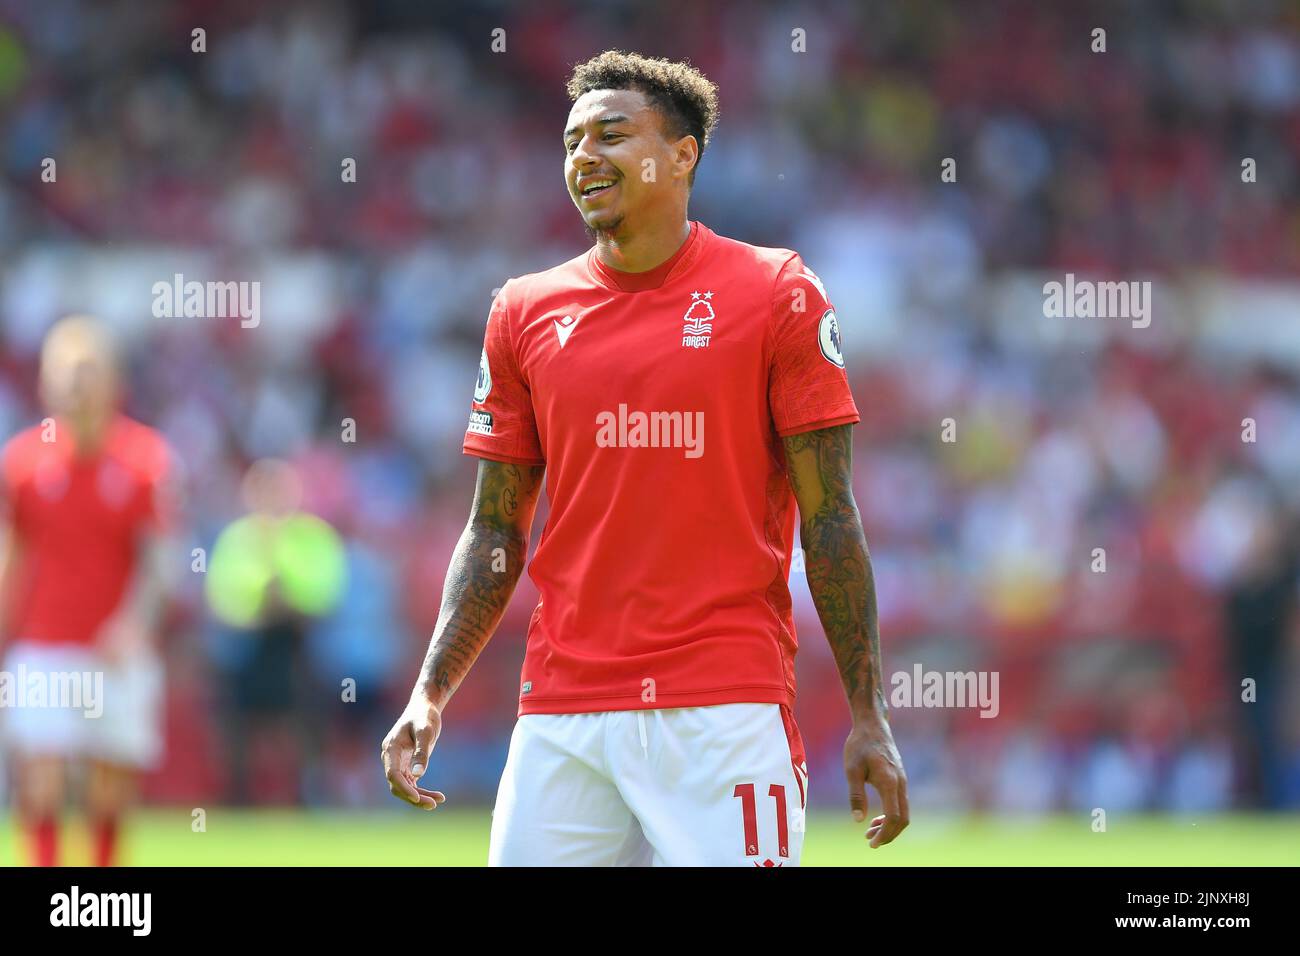 Nottingham, UK. 14th August 2022Jesse Lingard of Nottingham Forest smiles as West Ham supporters throw fake money on the pitch during the Premier League match between Nottingham Forest and West Ham United at the City Ground, Nottingham on Sunday 14th August 2022. (Credit: Jon Hobley | MI News) Credit: MI News & Sport /Alamy Live News Stock Photo